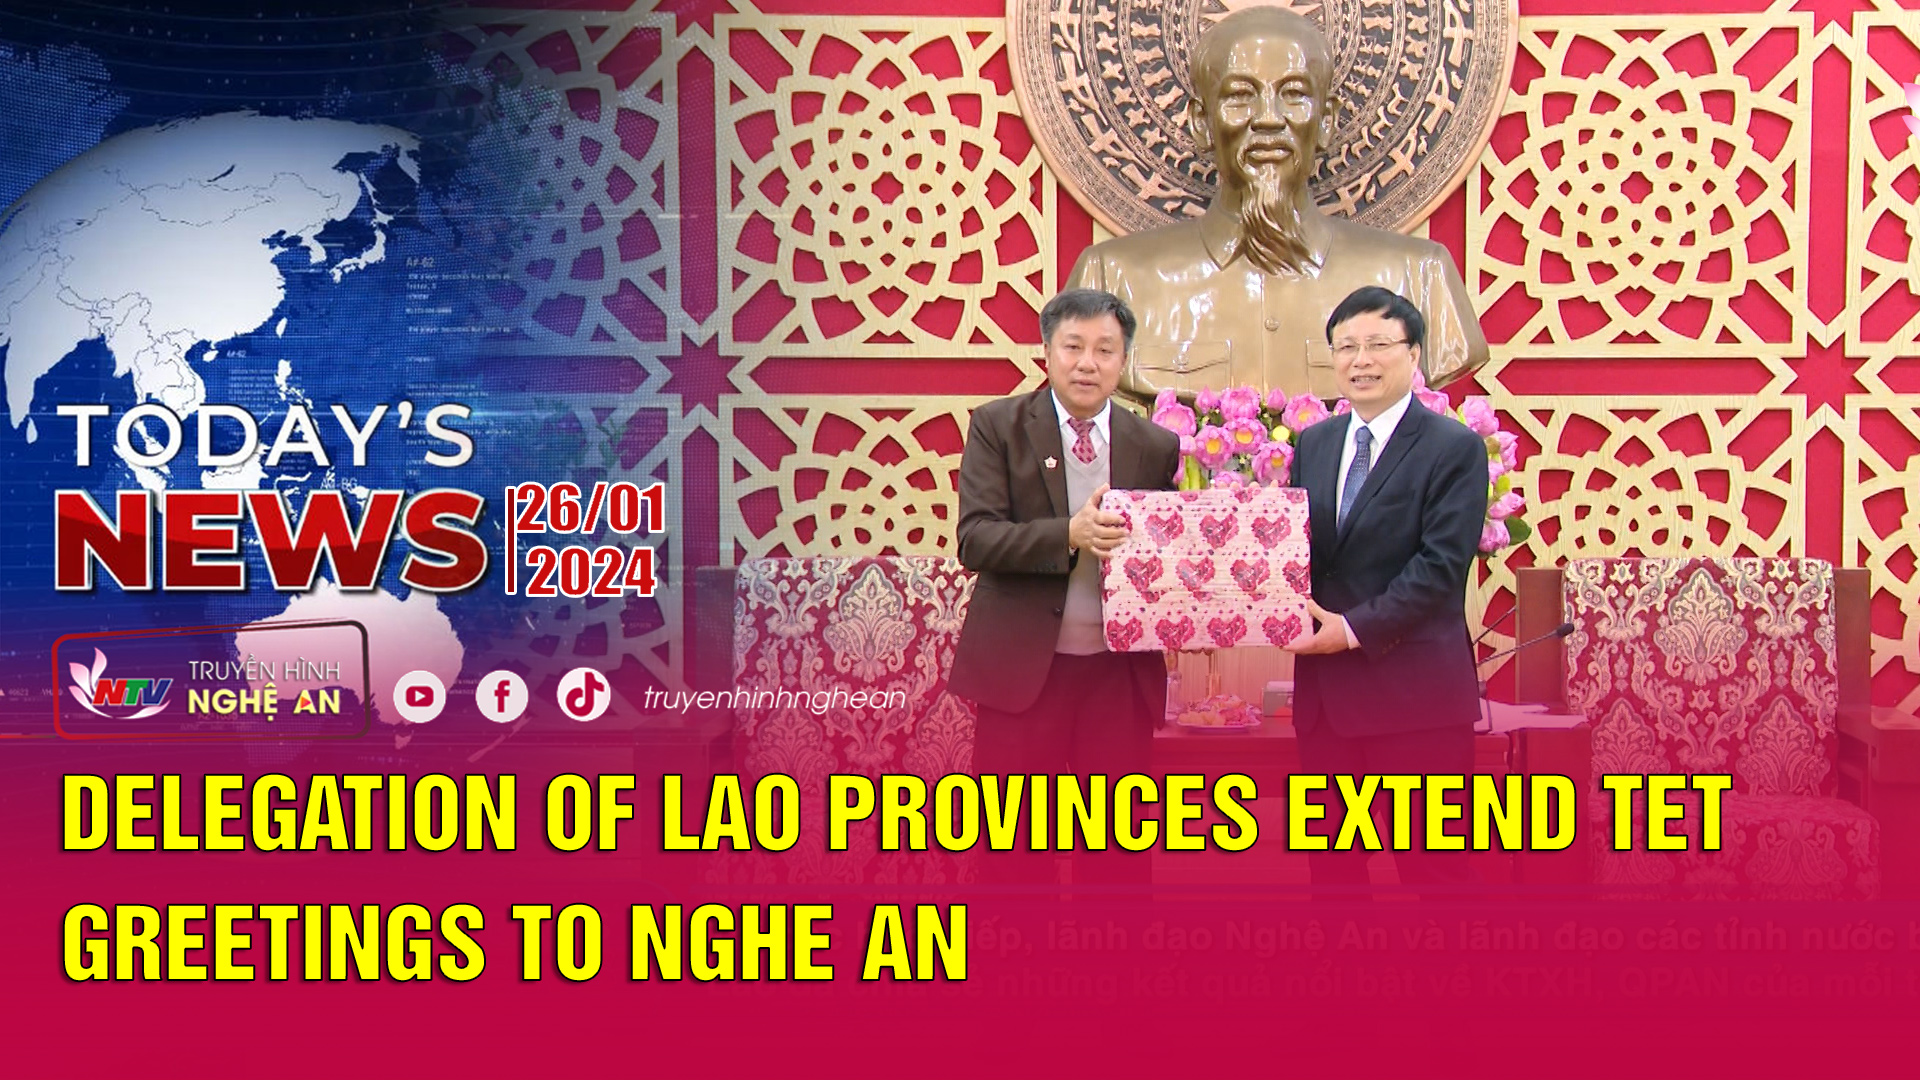 Today's News - 26/01/2024: Delegation of Lao provinces extend Tet greetings to Nghe An